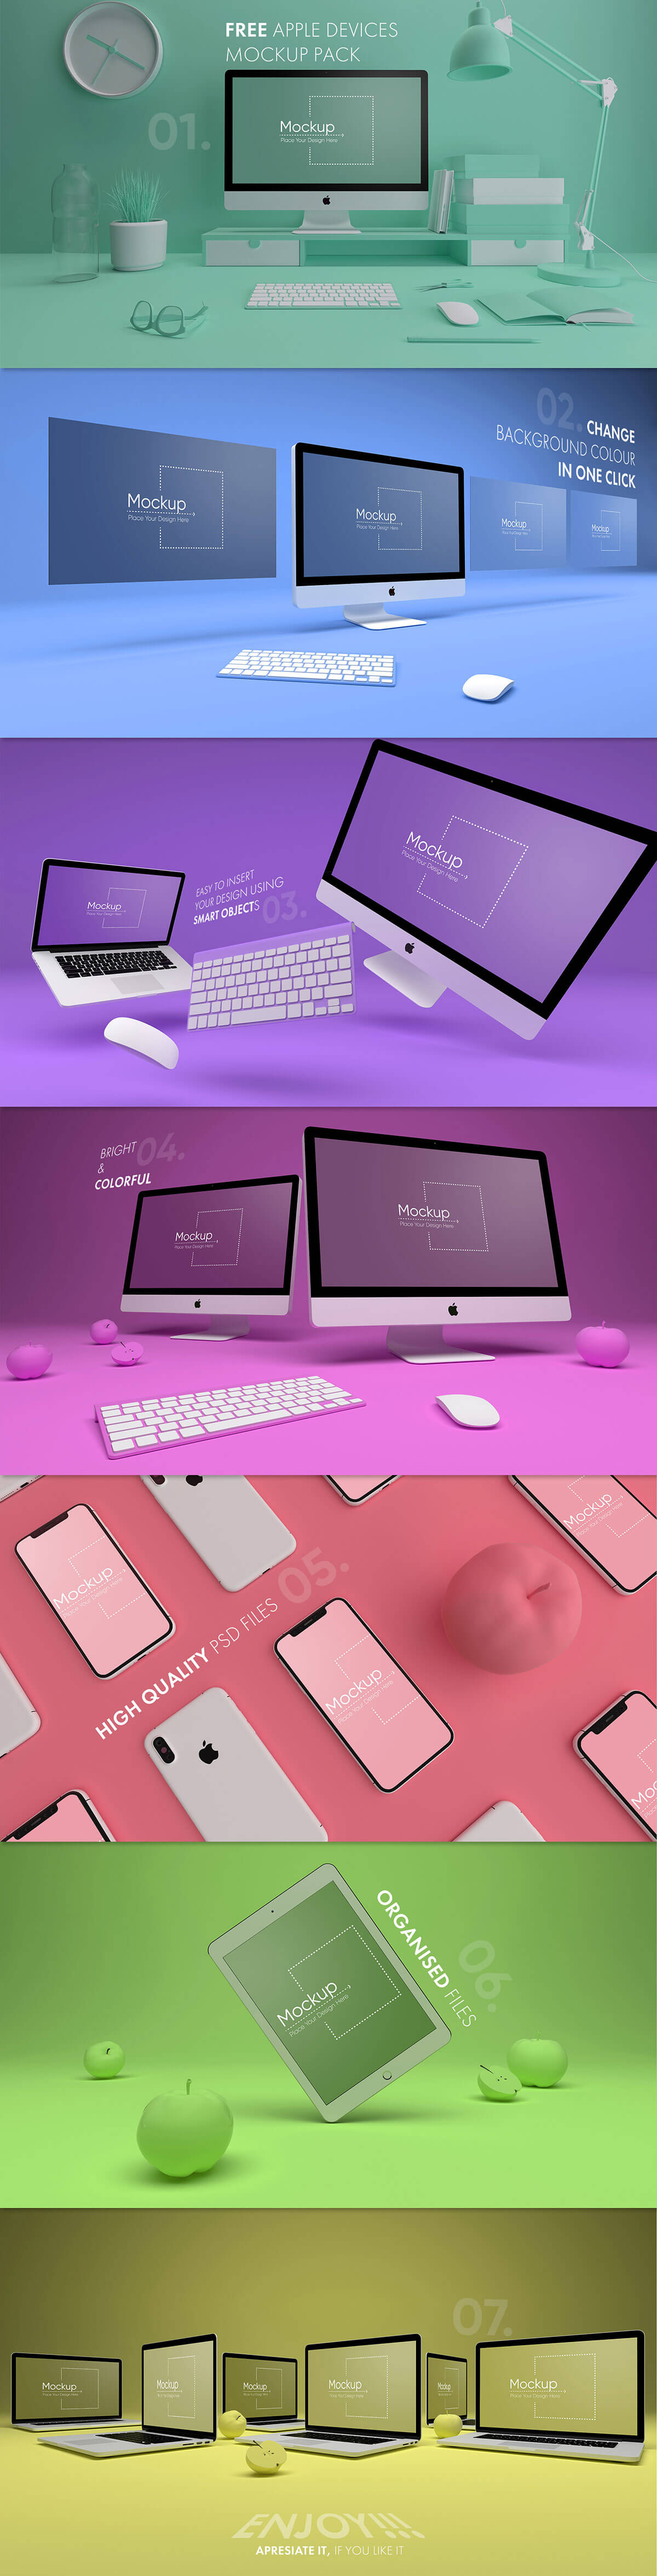 7 Free Colorful Apple Devices Mockup Pack